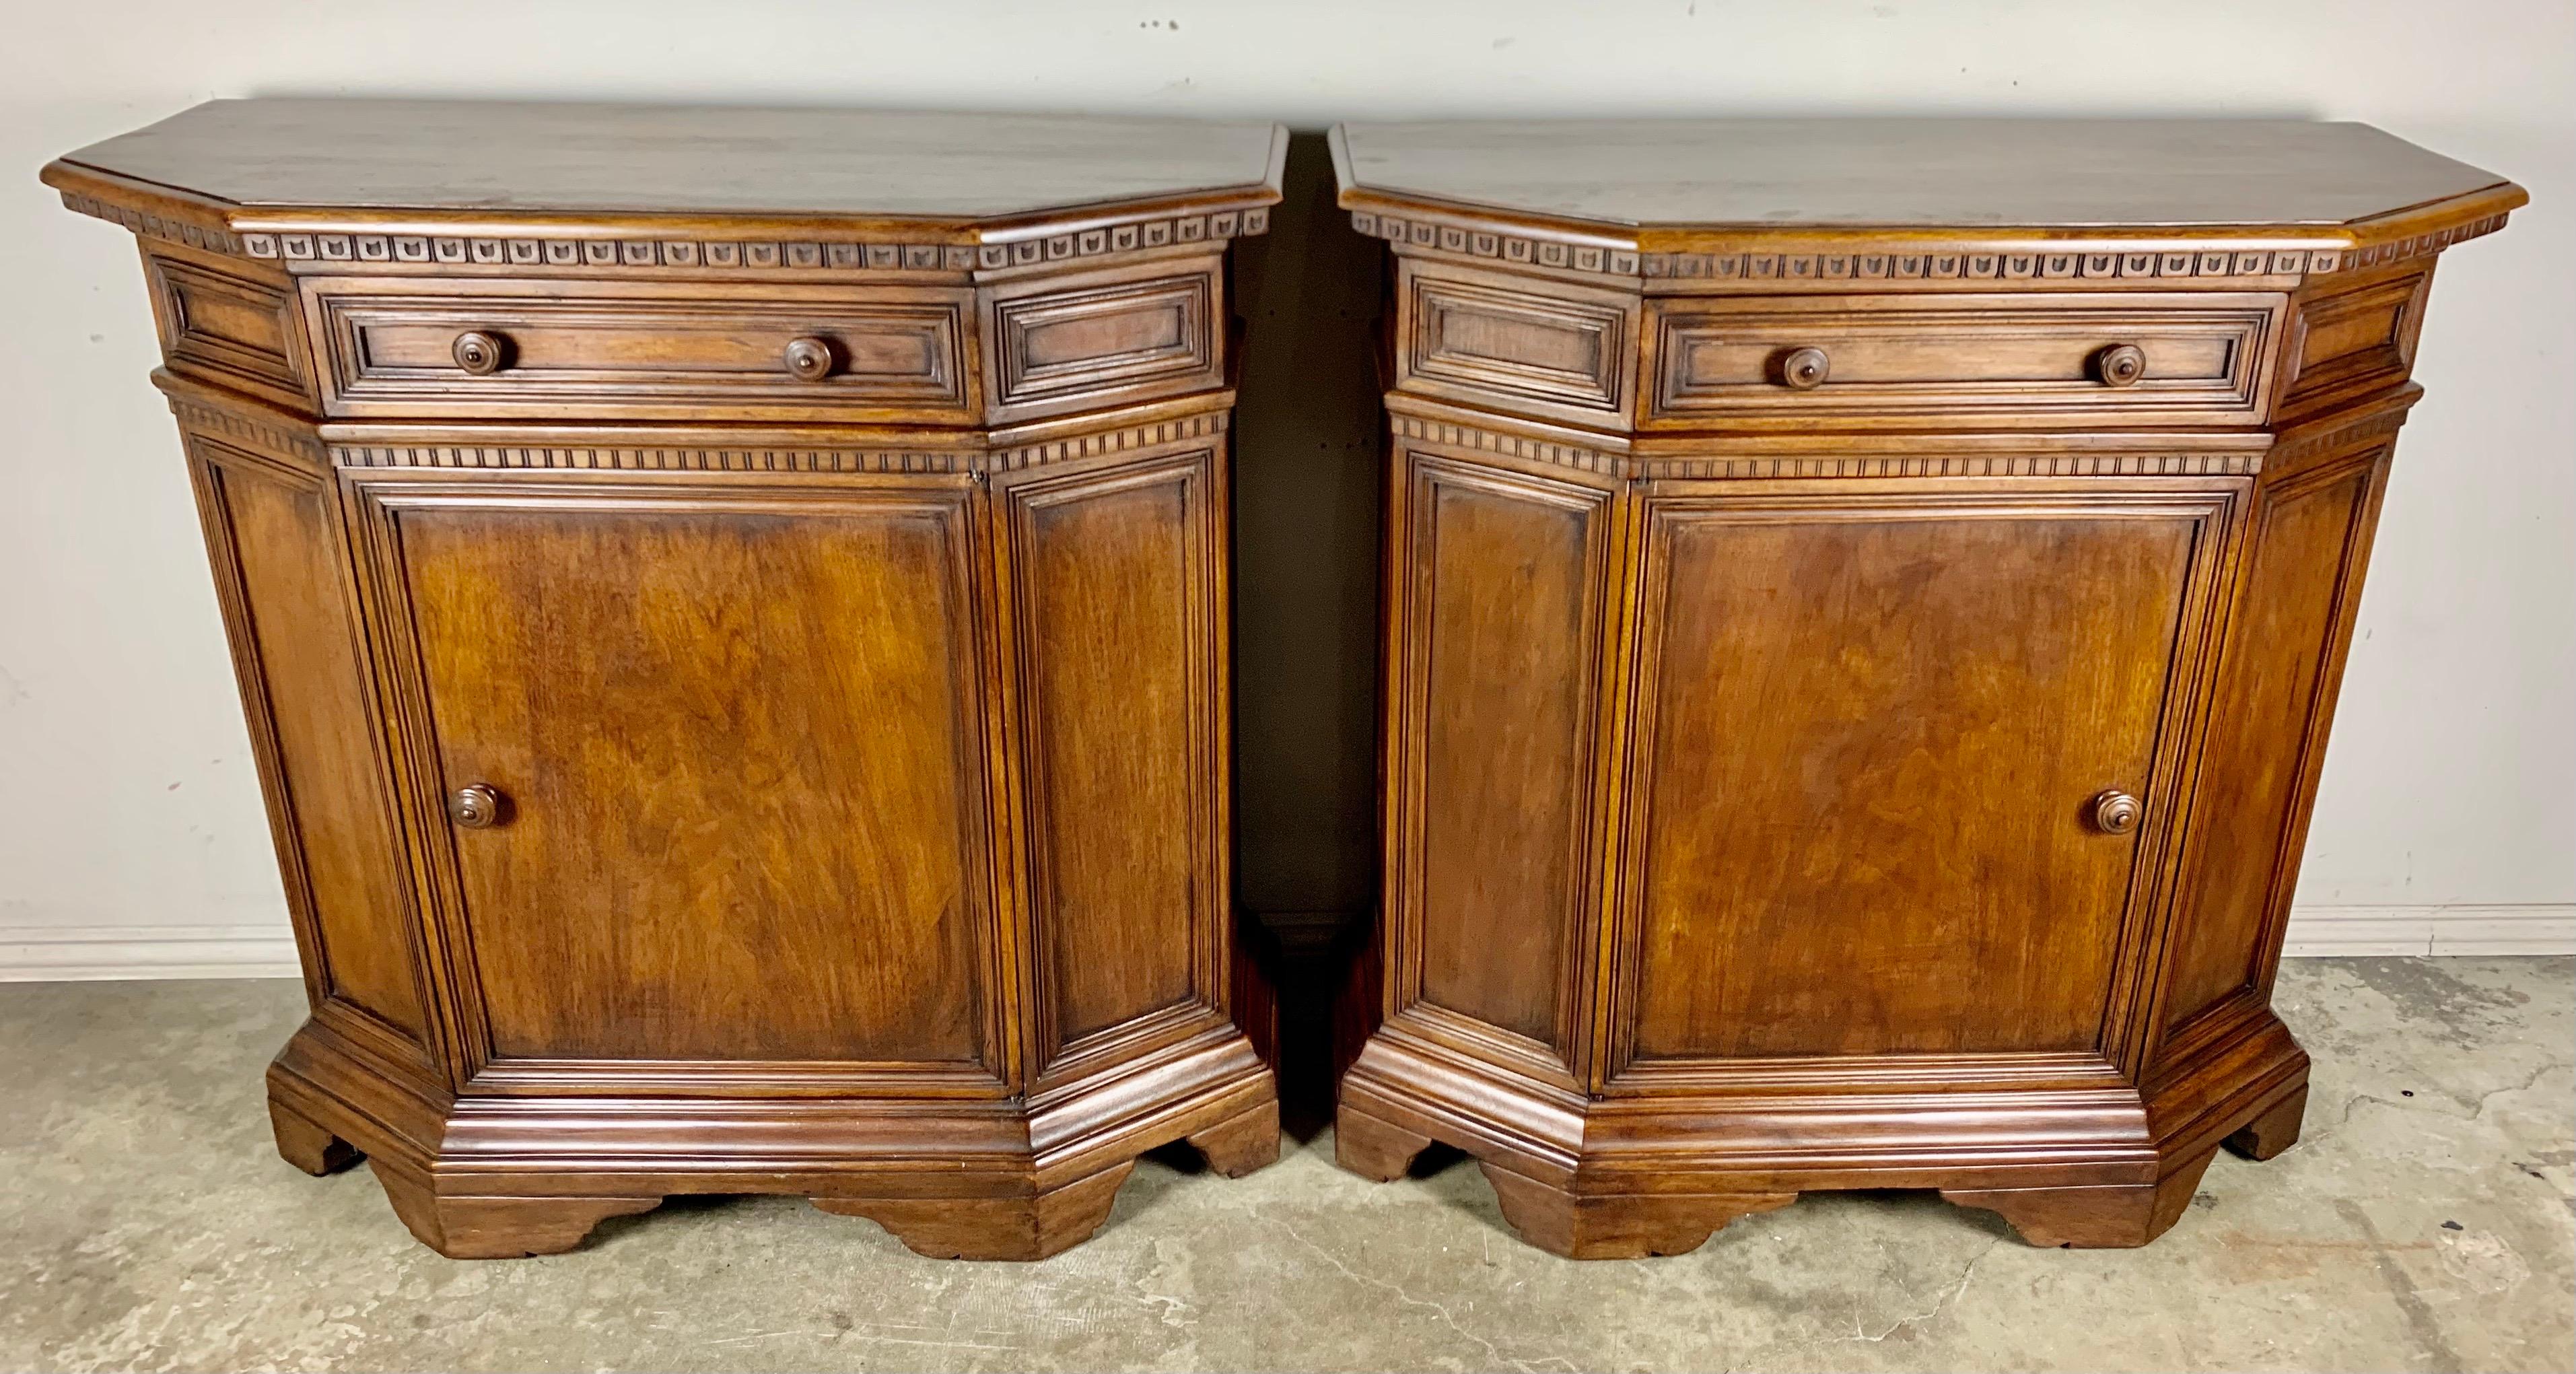 Pair of Italian walnut credenzas, circa 1930s. Beautiful carved details but simple and elegant in design. There is a single drawer and cabinet door on both pieces. One interior shelf is missing.